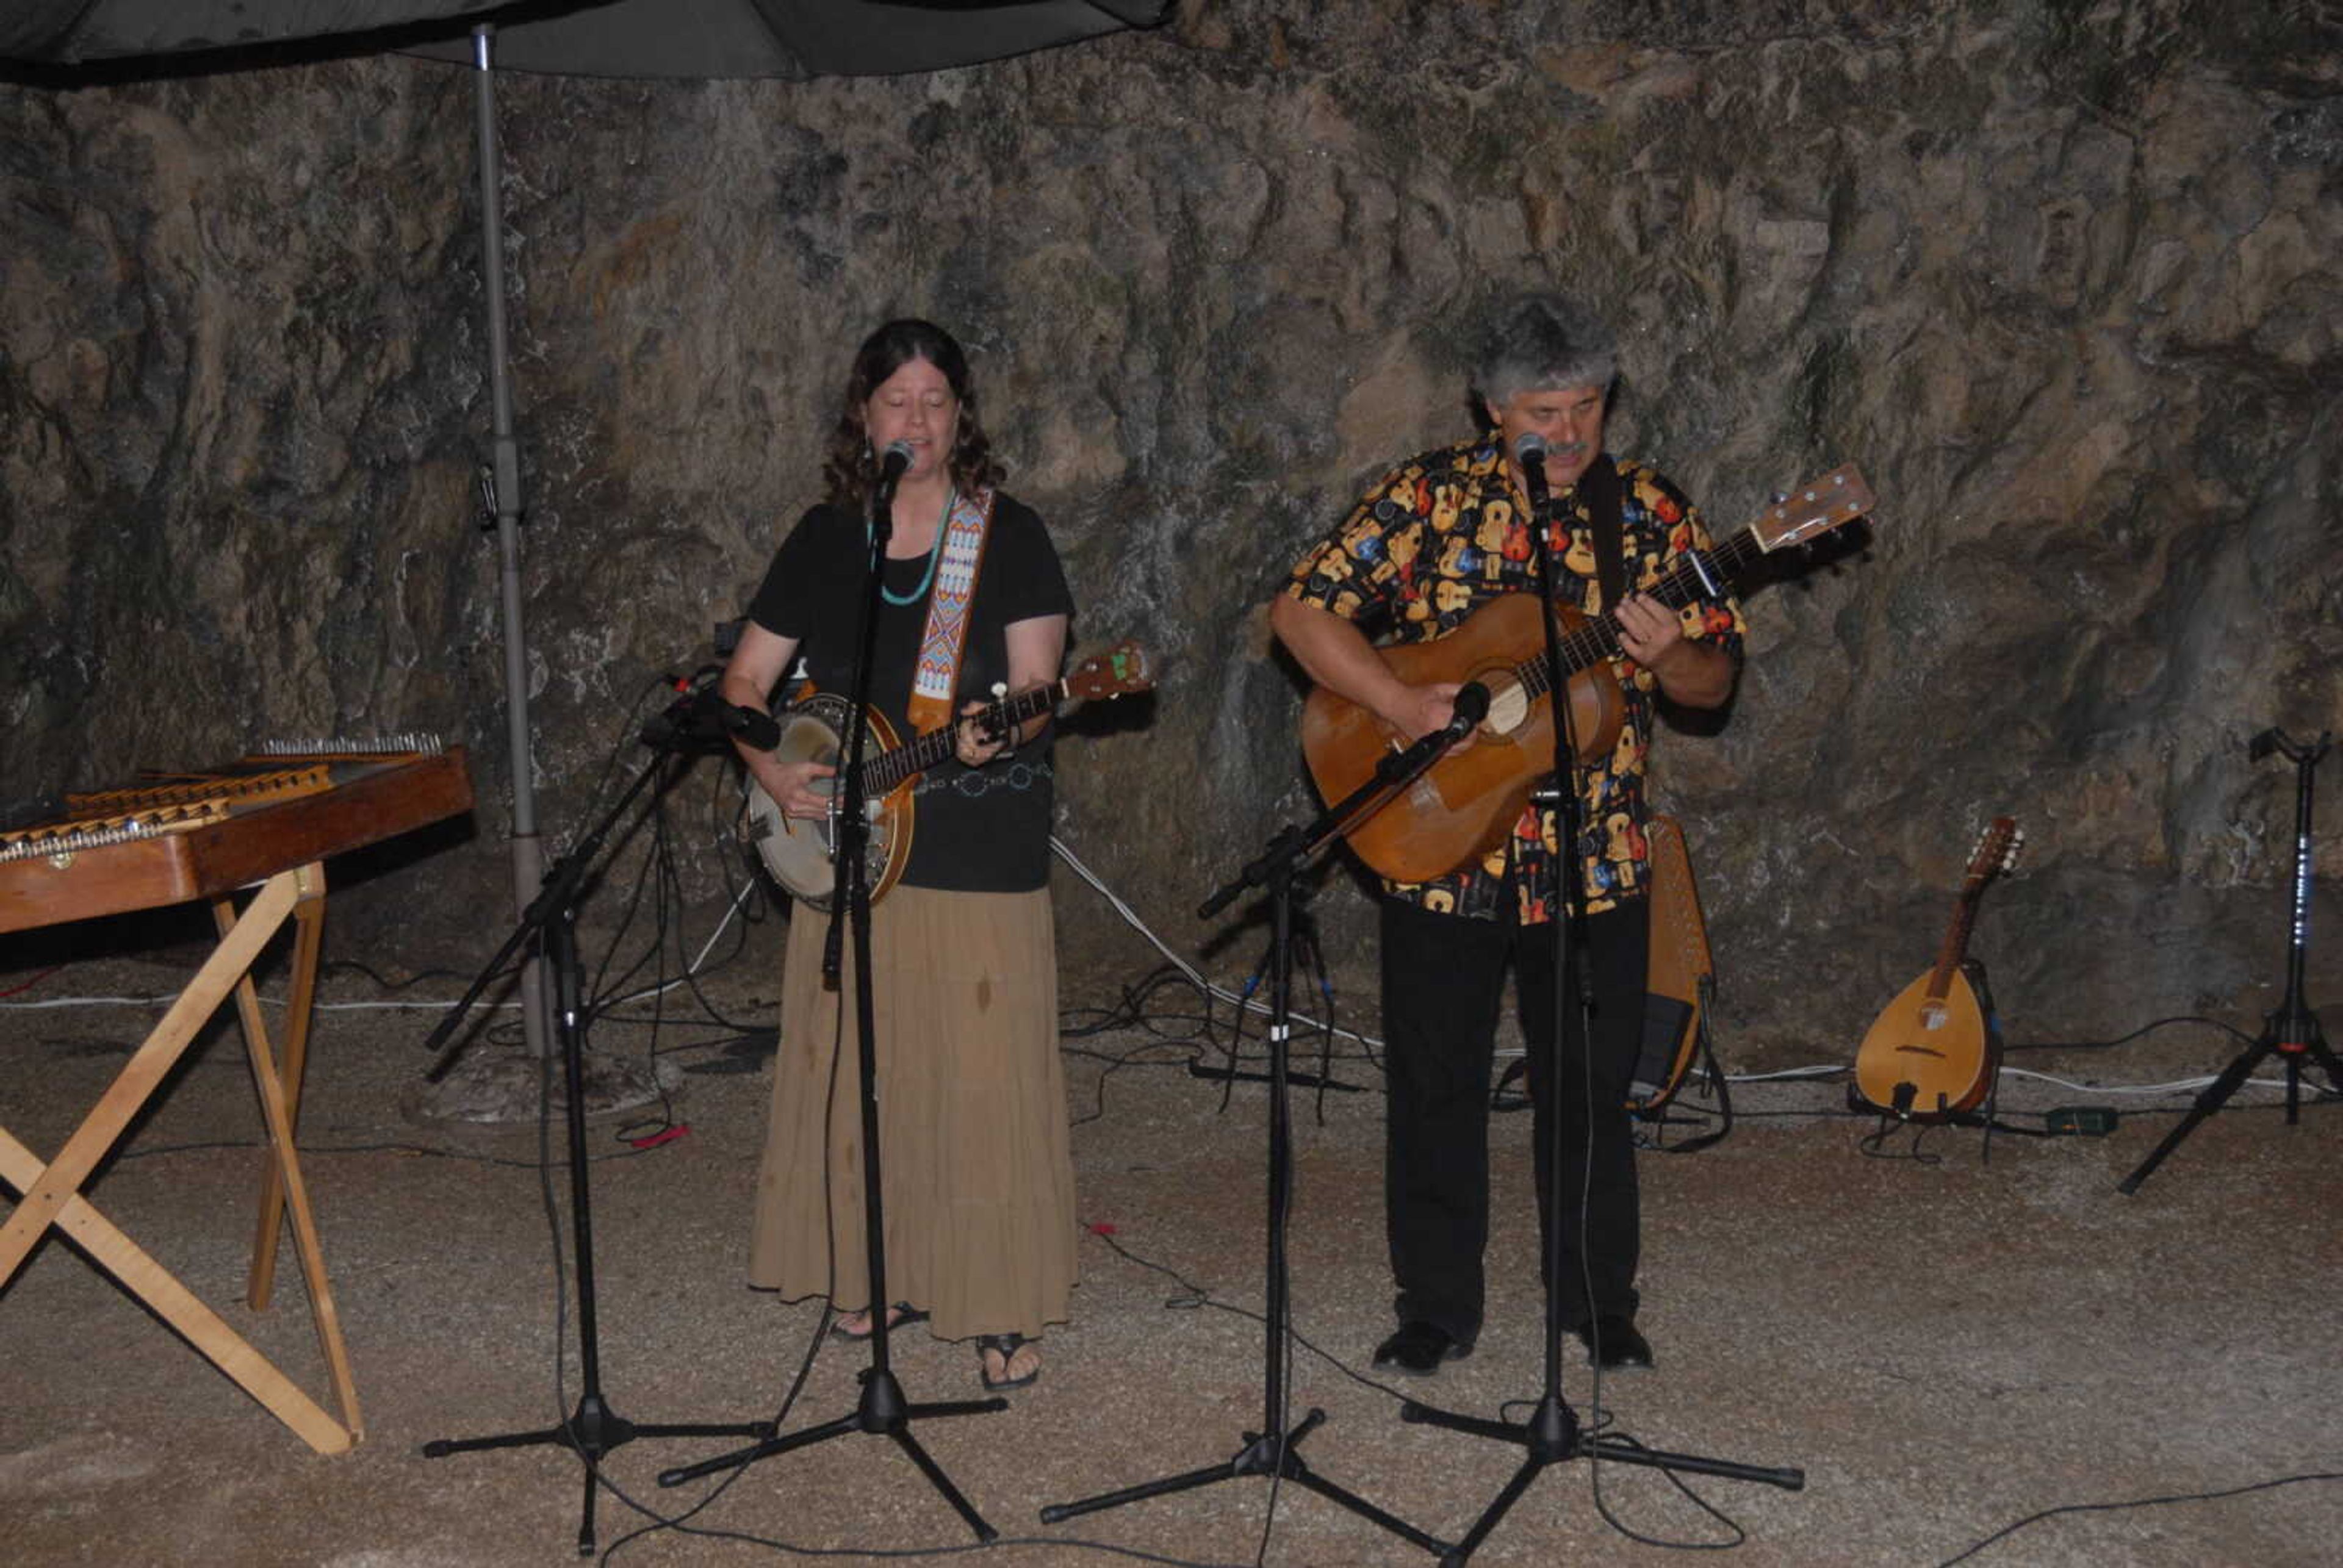 KRCU to host sixth annual Concert in a Cave on Aug. 30